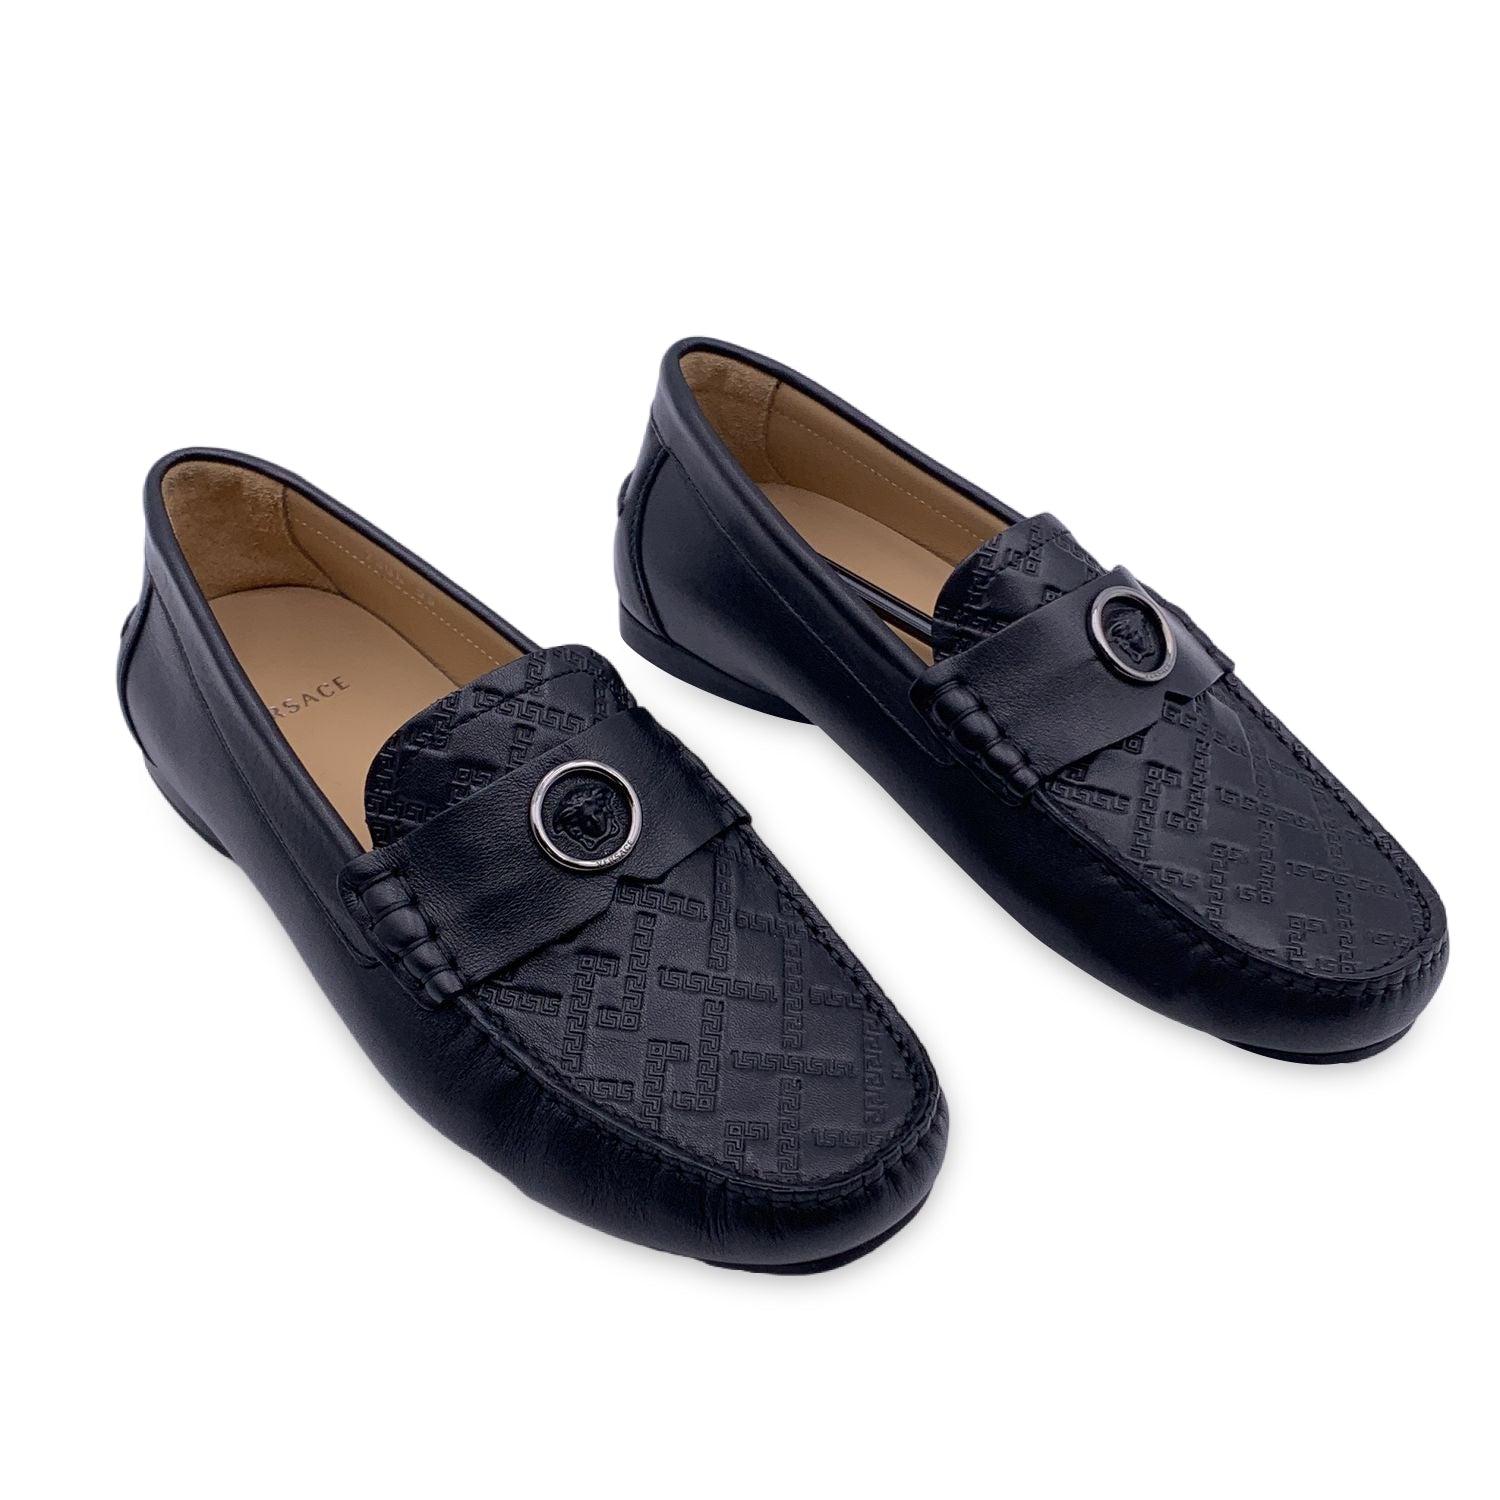 Beautiful Versace car shoes. Crafted in black leather with engraved greek and Medusa detailing on top. They feature a rounded toe and slip-on design. Rubber sole. Made in Italy. Size: EU 39 (The size shown for this item is the size indicated by the